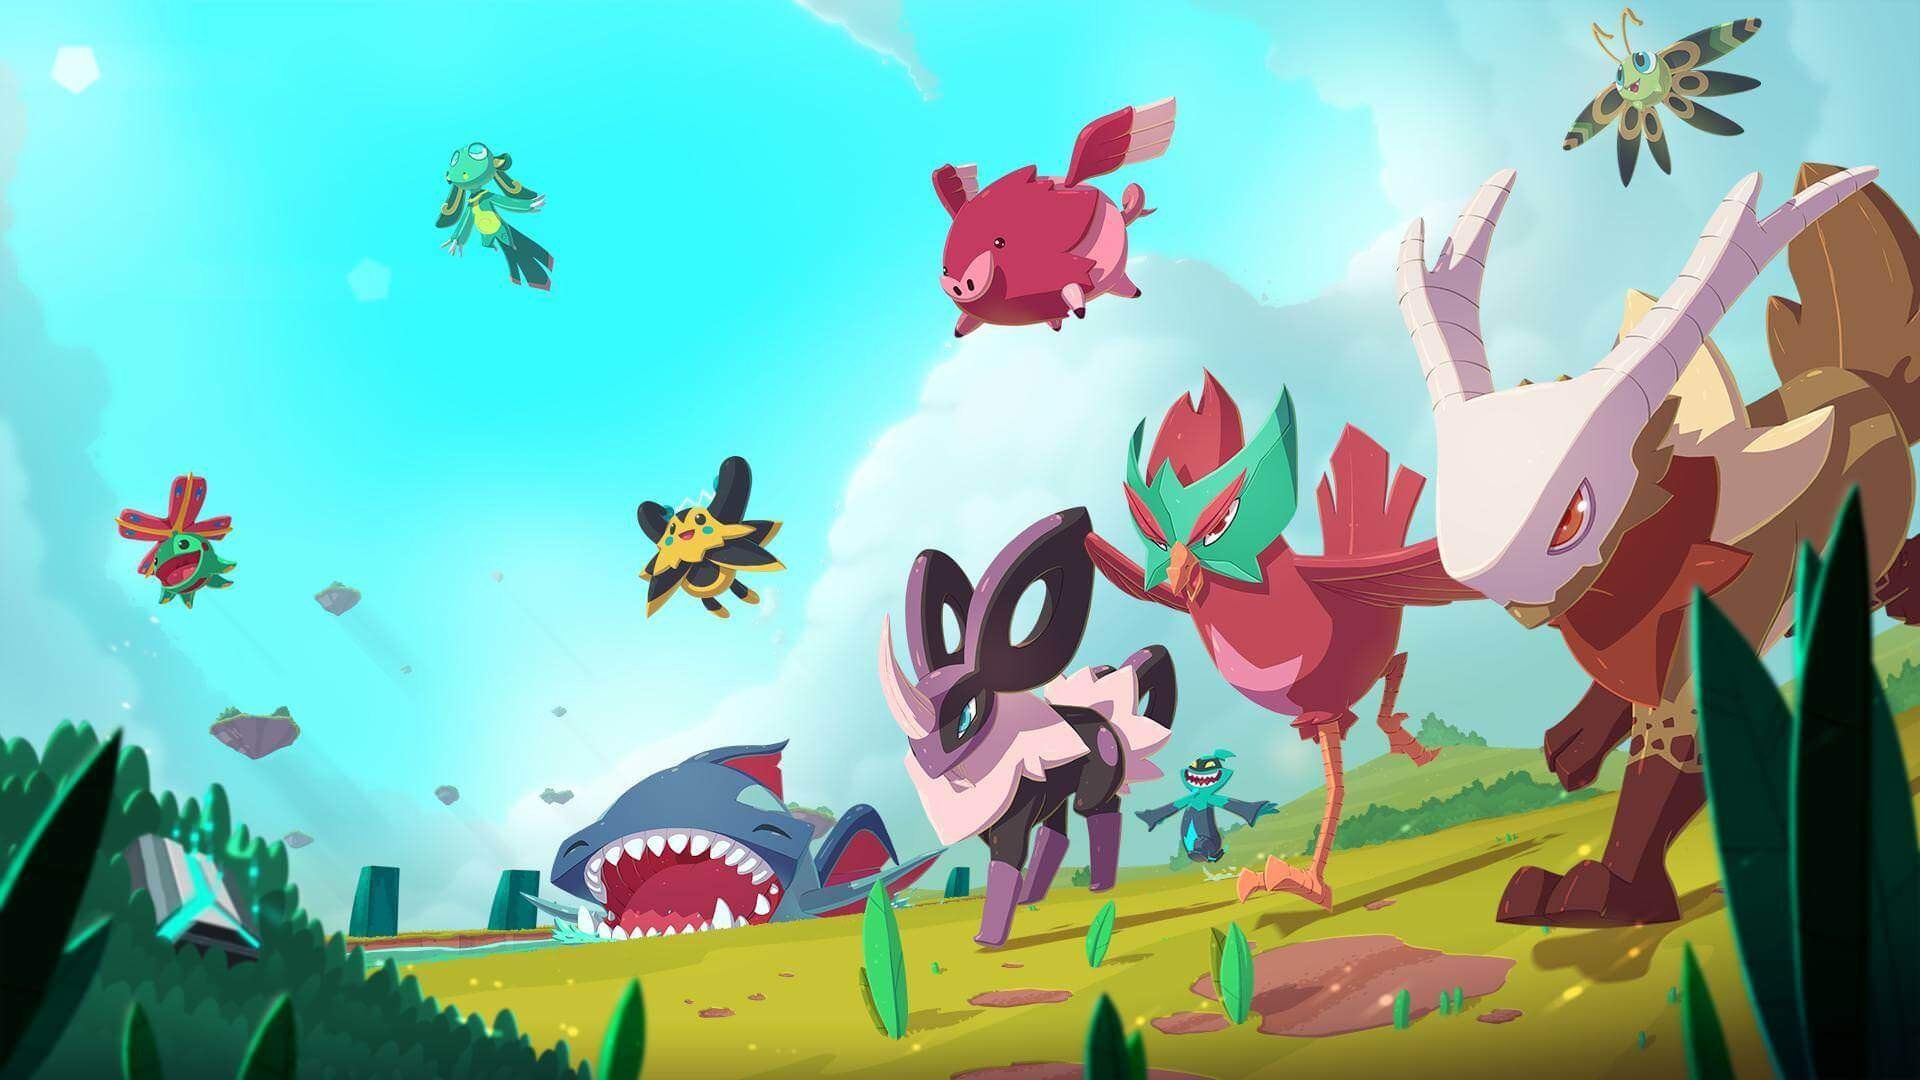 Pokémon Like MMO Temtem Targets 2021 Release Date On Consoles